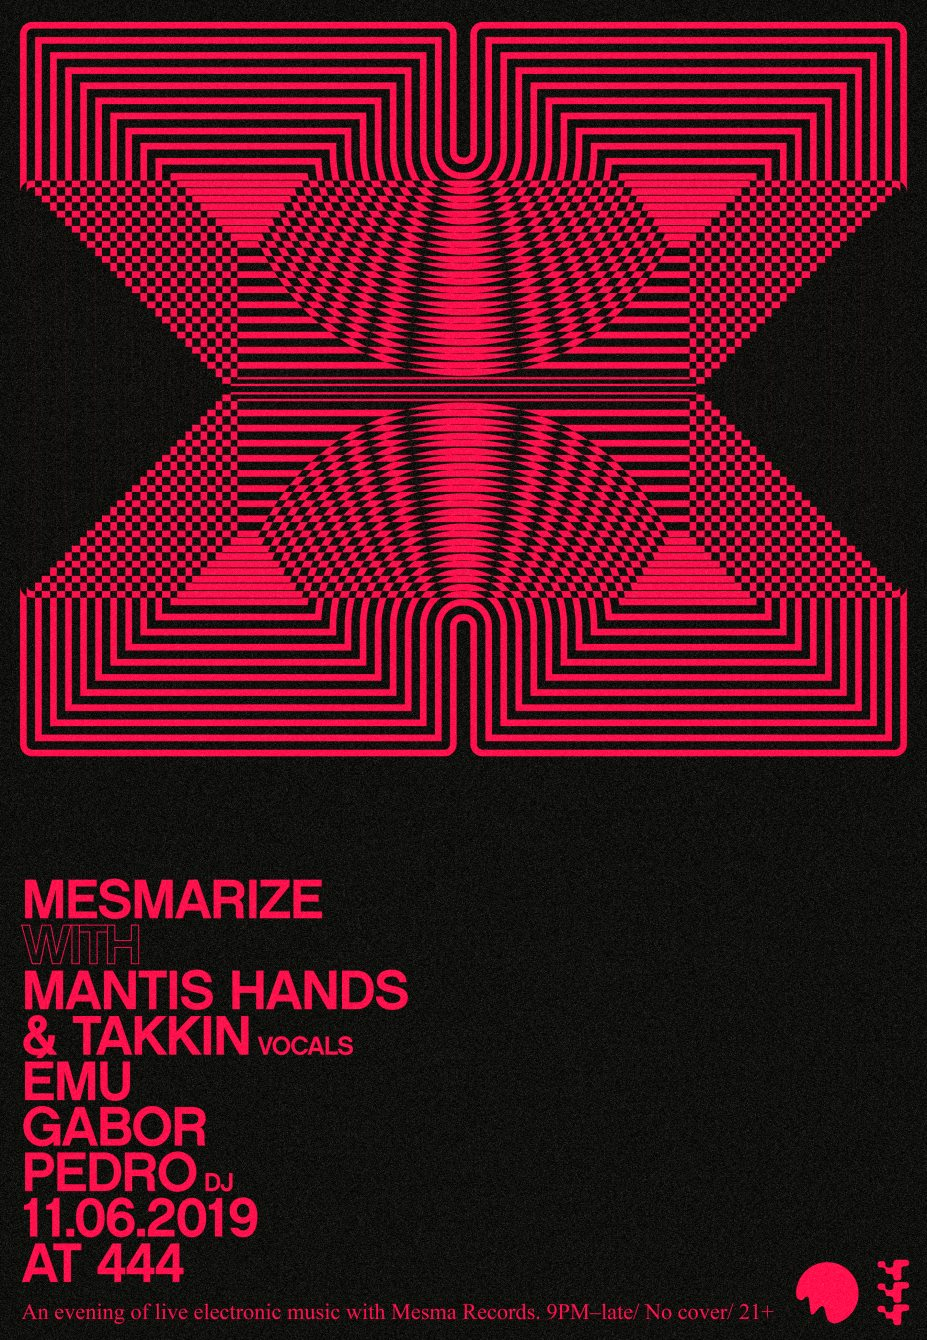 Mesmarize 01 - Flyer front